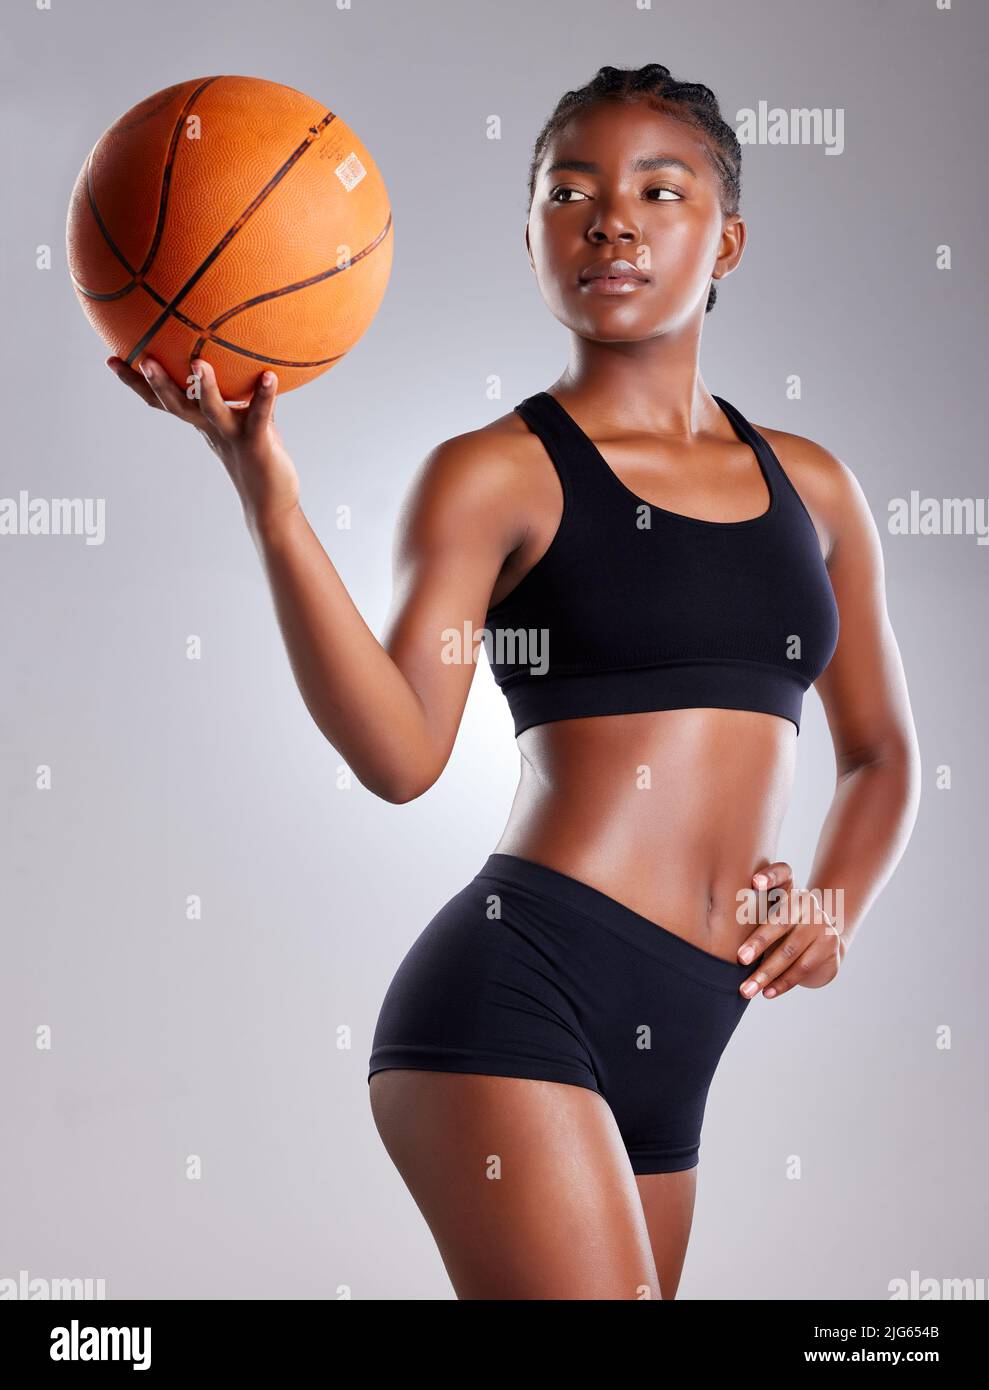 How many hoops can you shoot. Studio shot of a sporty young woman posing with a basketball against a grey background. Stock Photo